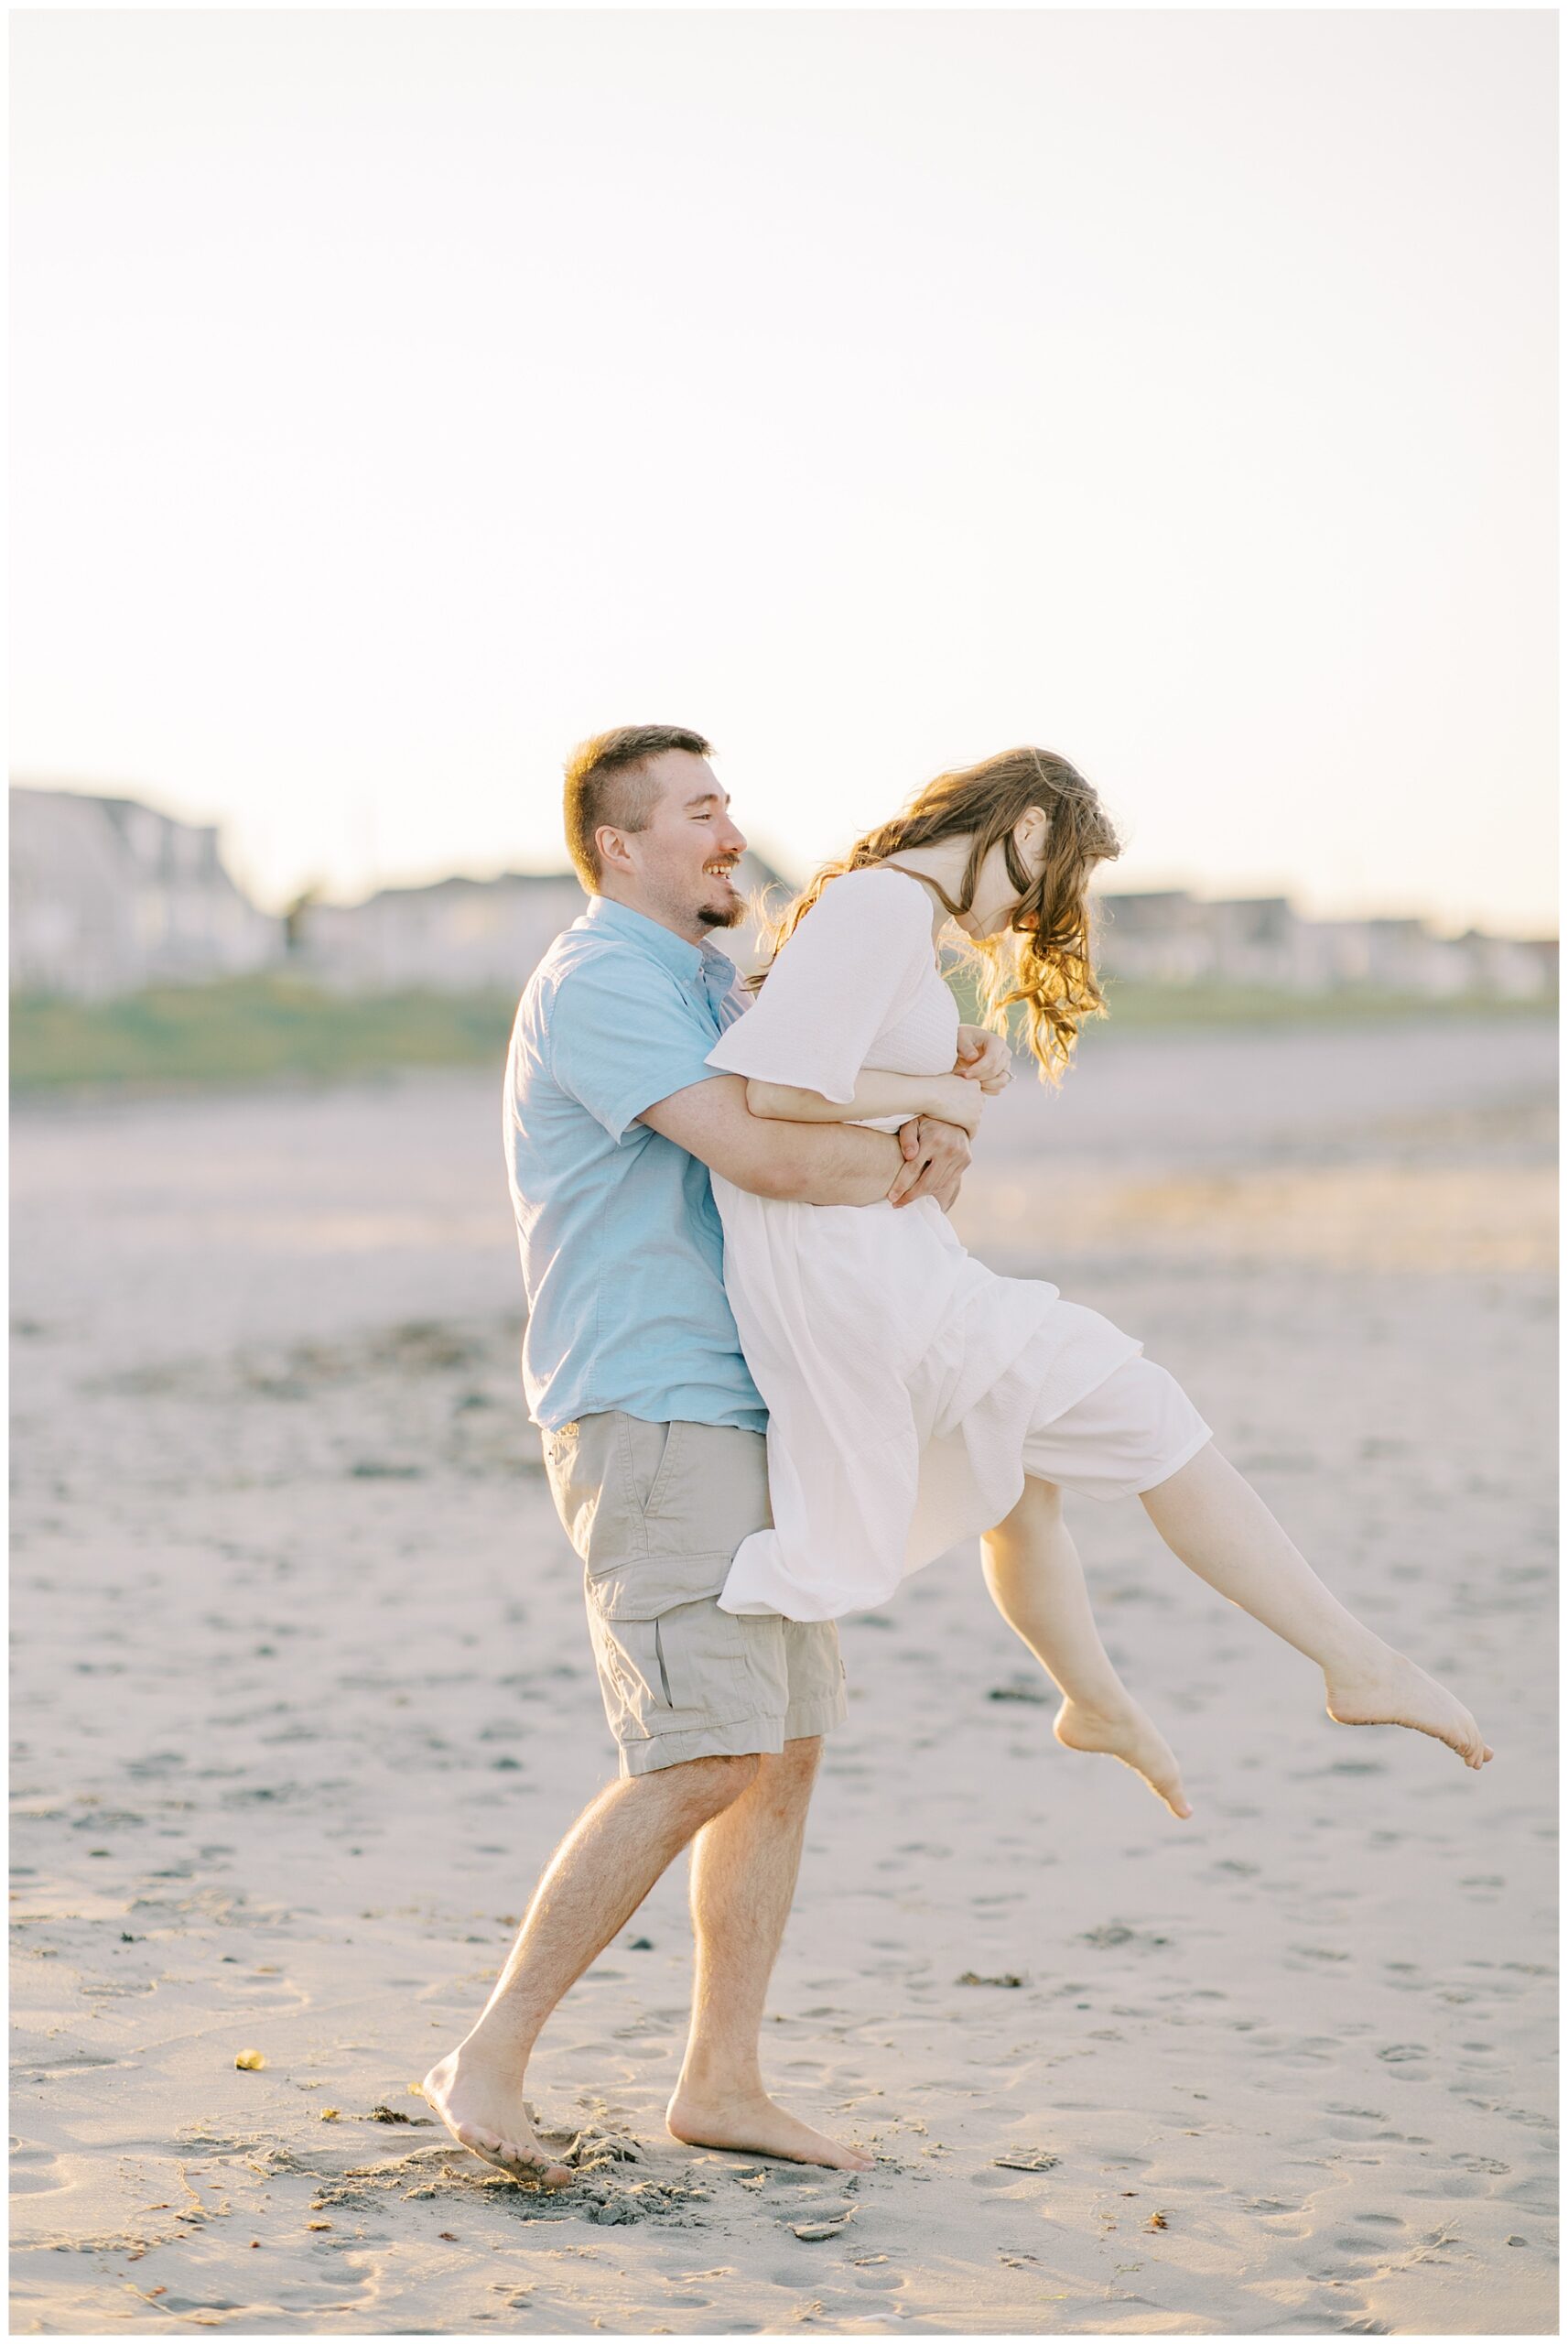 candid portraits of engaged couple having fun on the beach